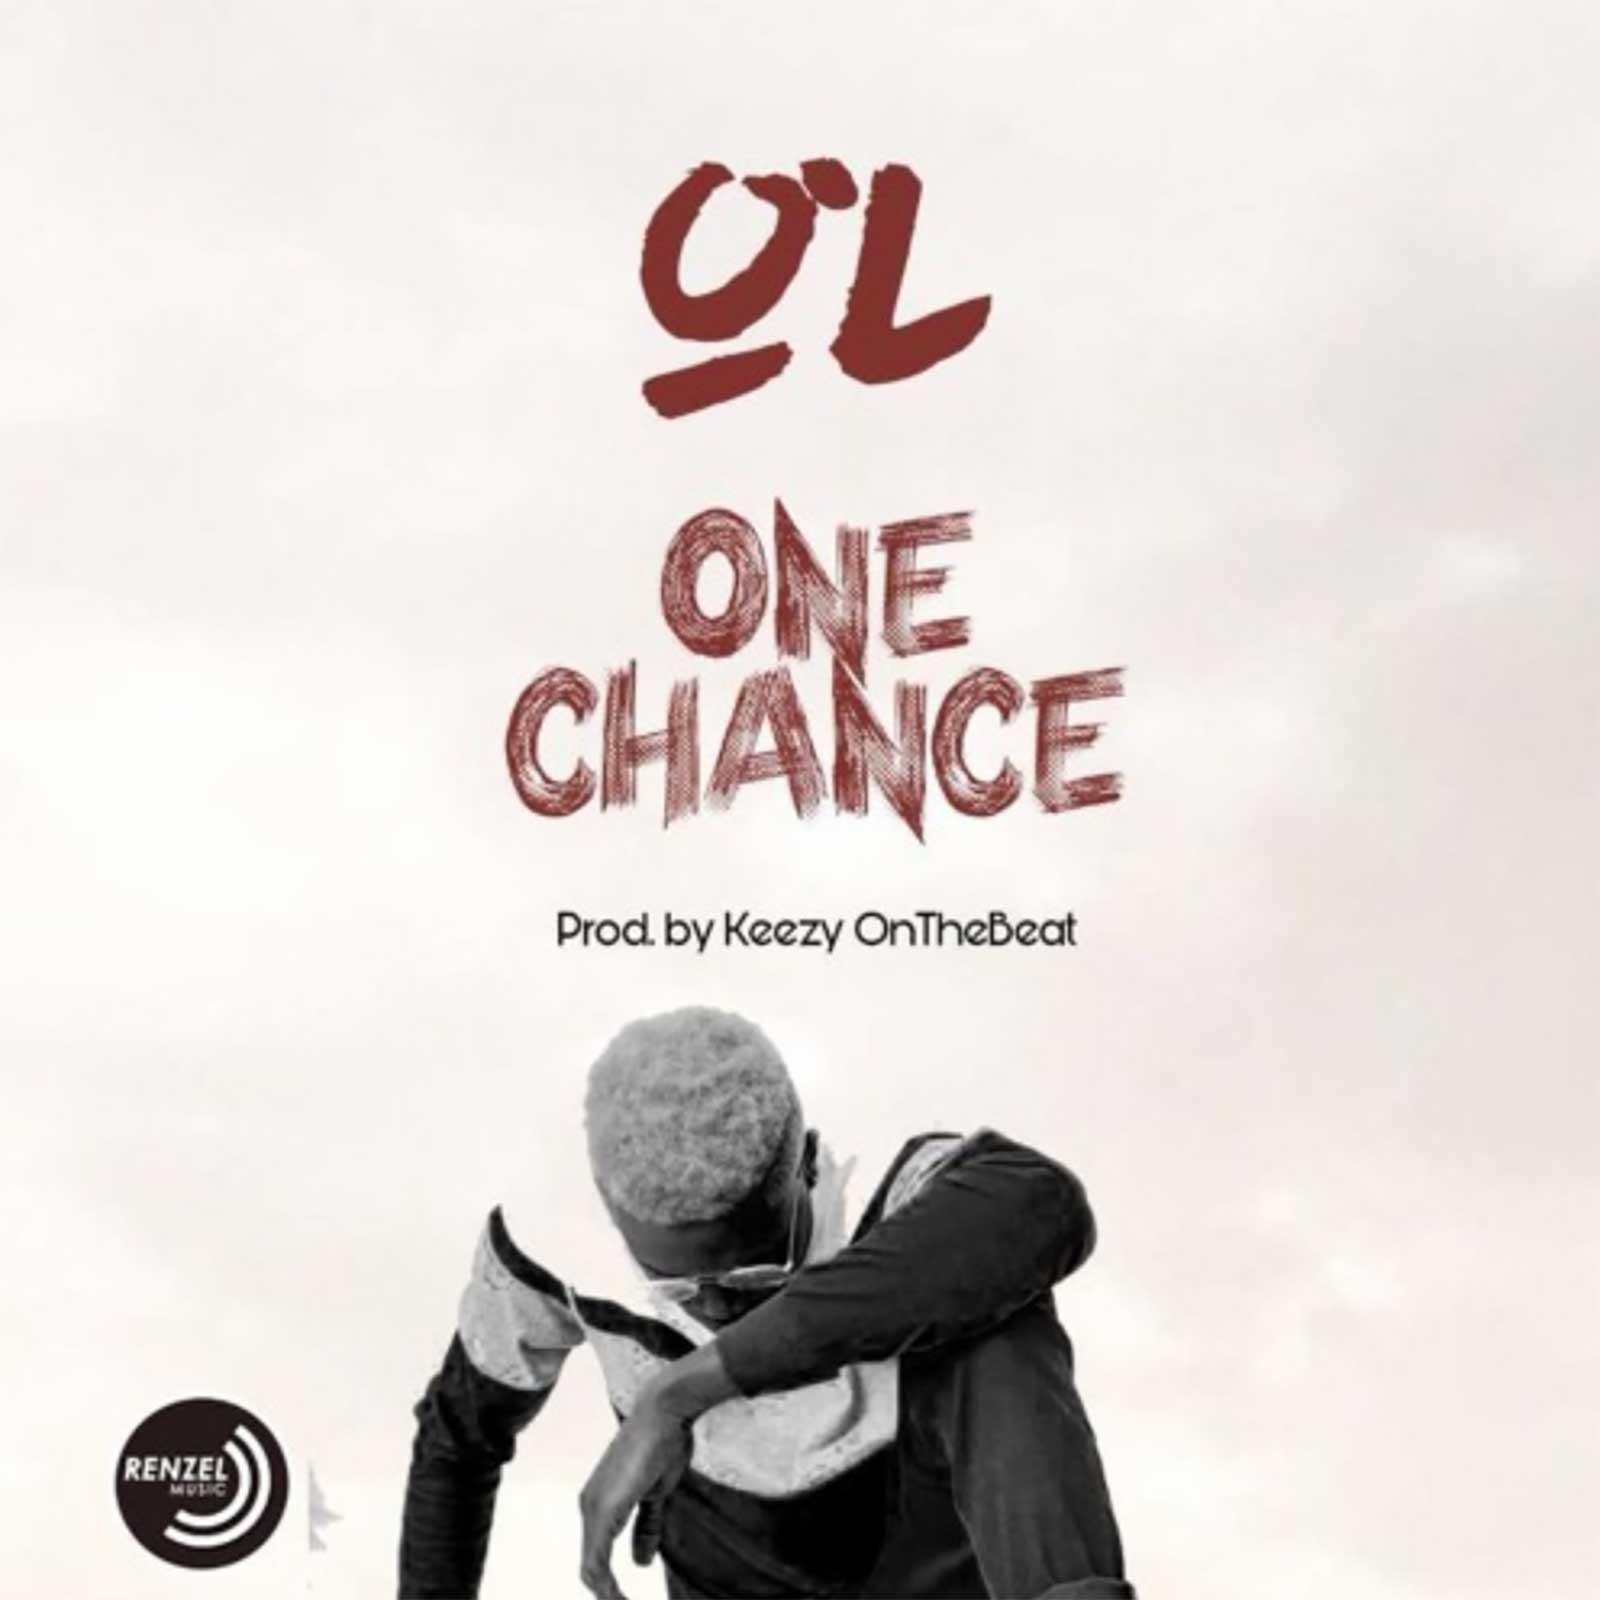 One Chance by O.L